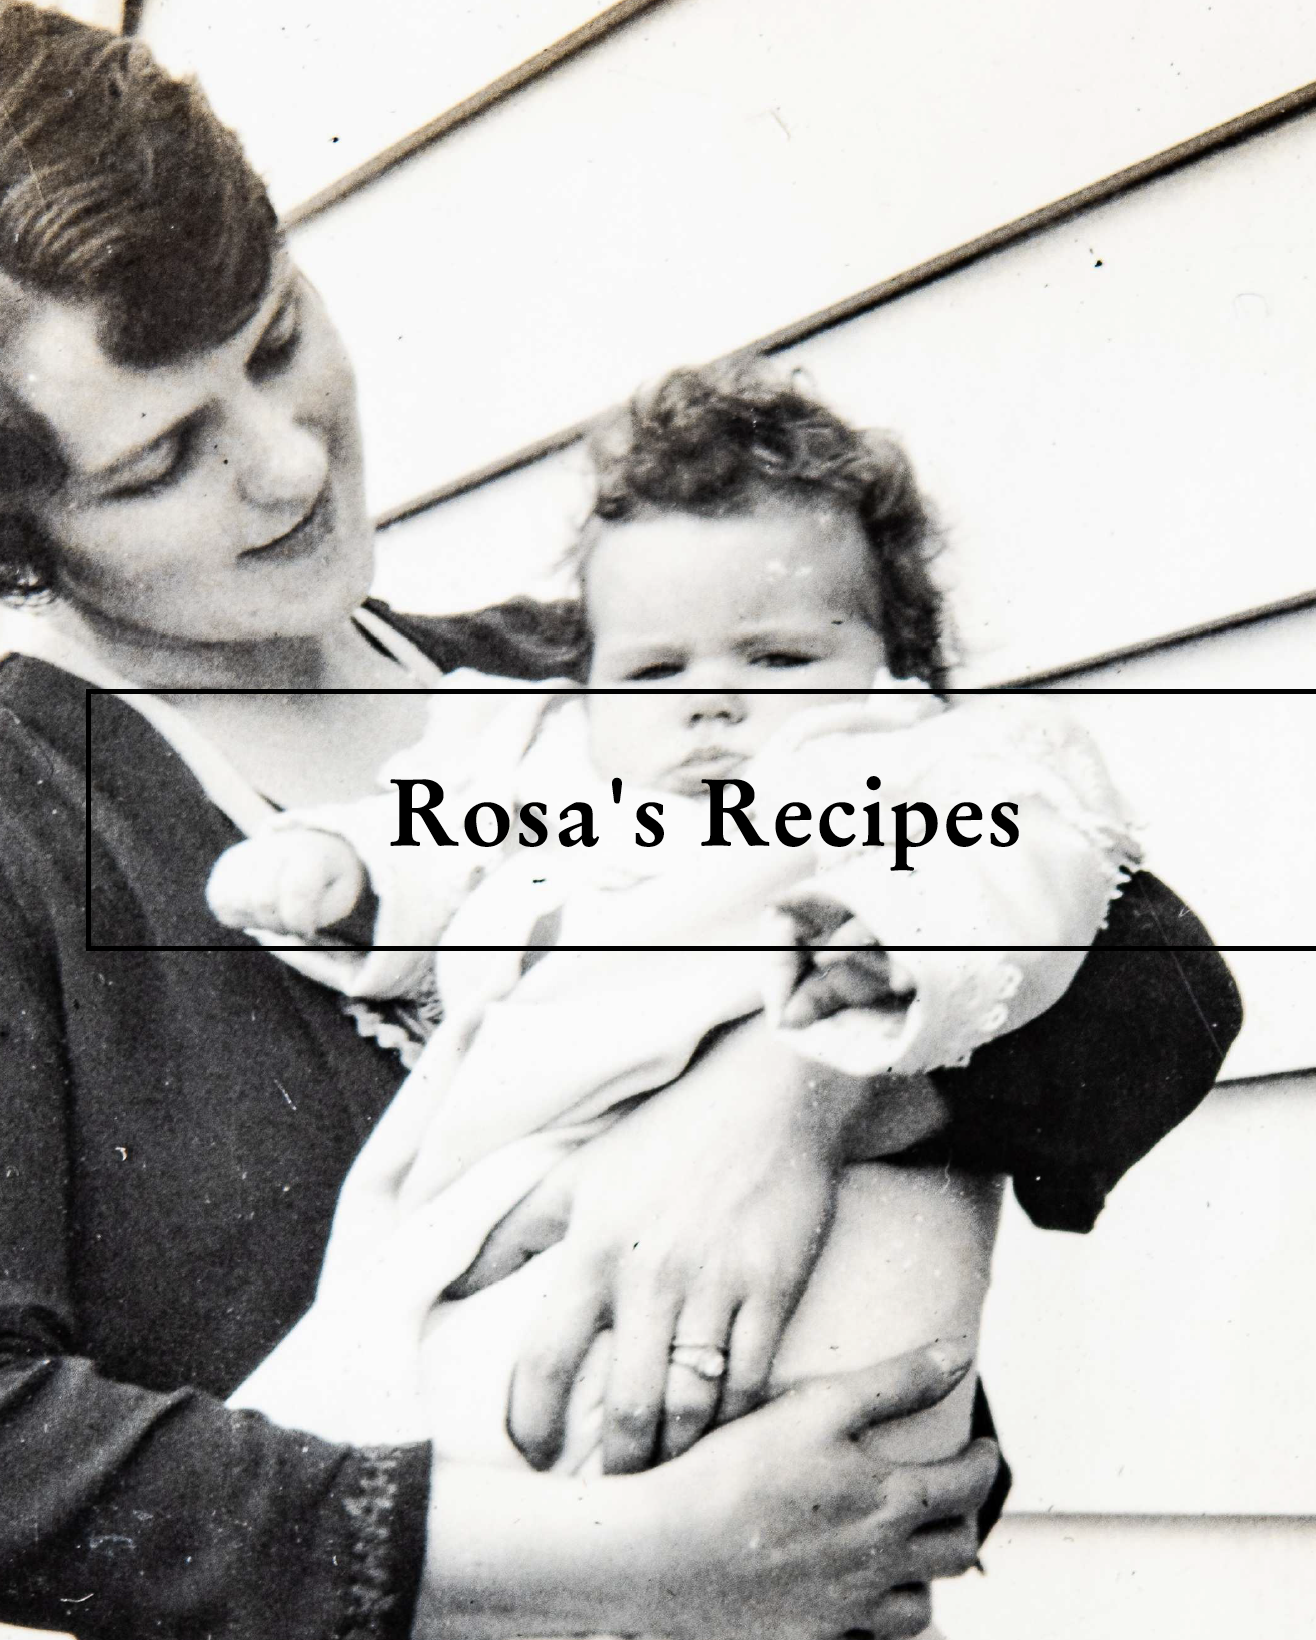 organizing family photos | creating a family recipe book | miss mustard seed